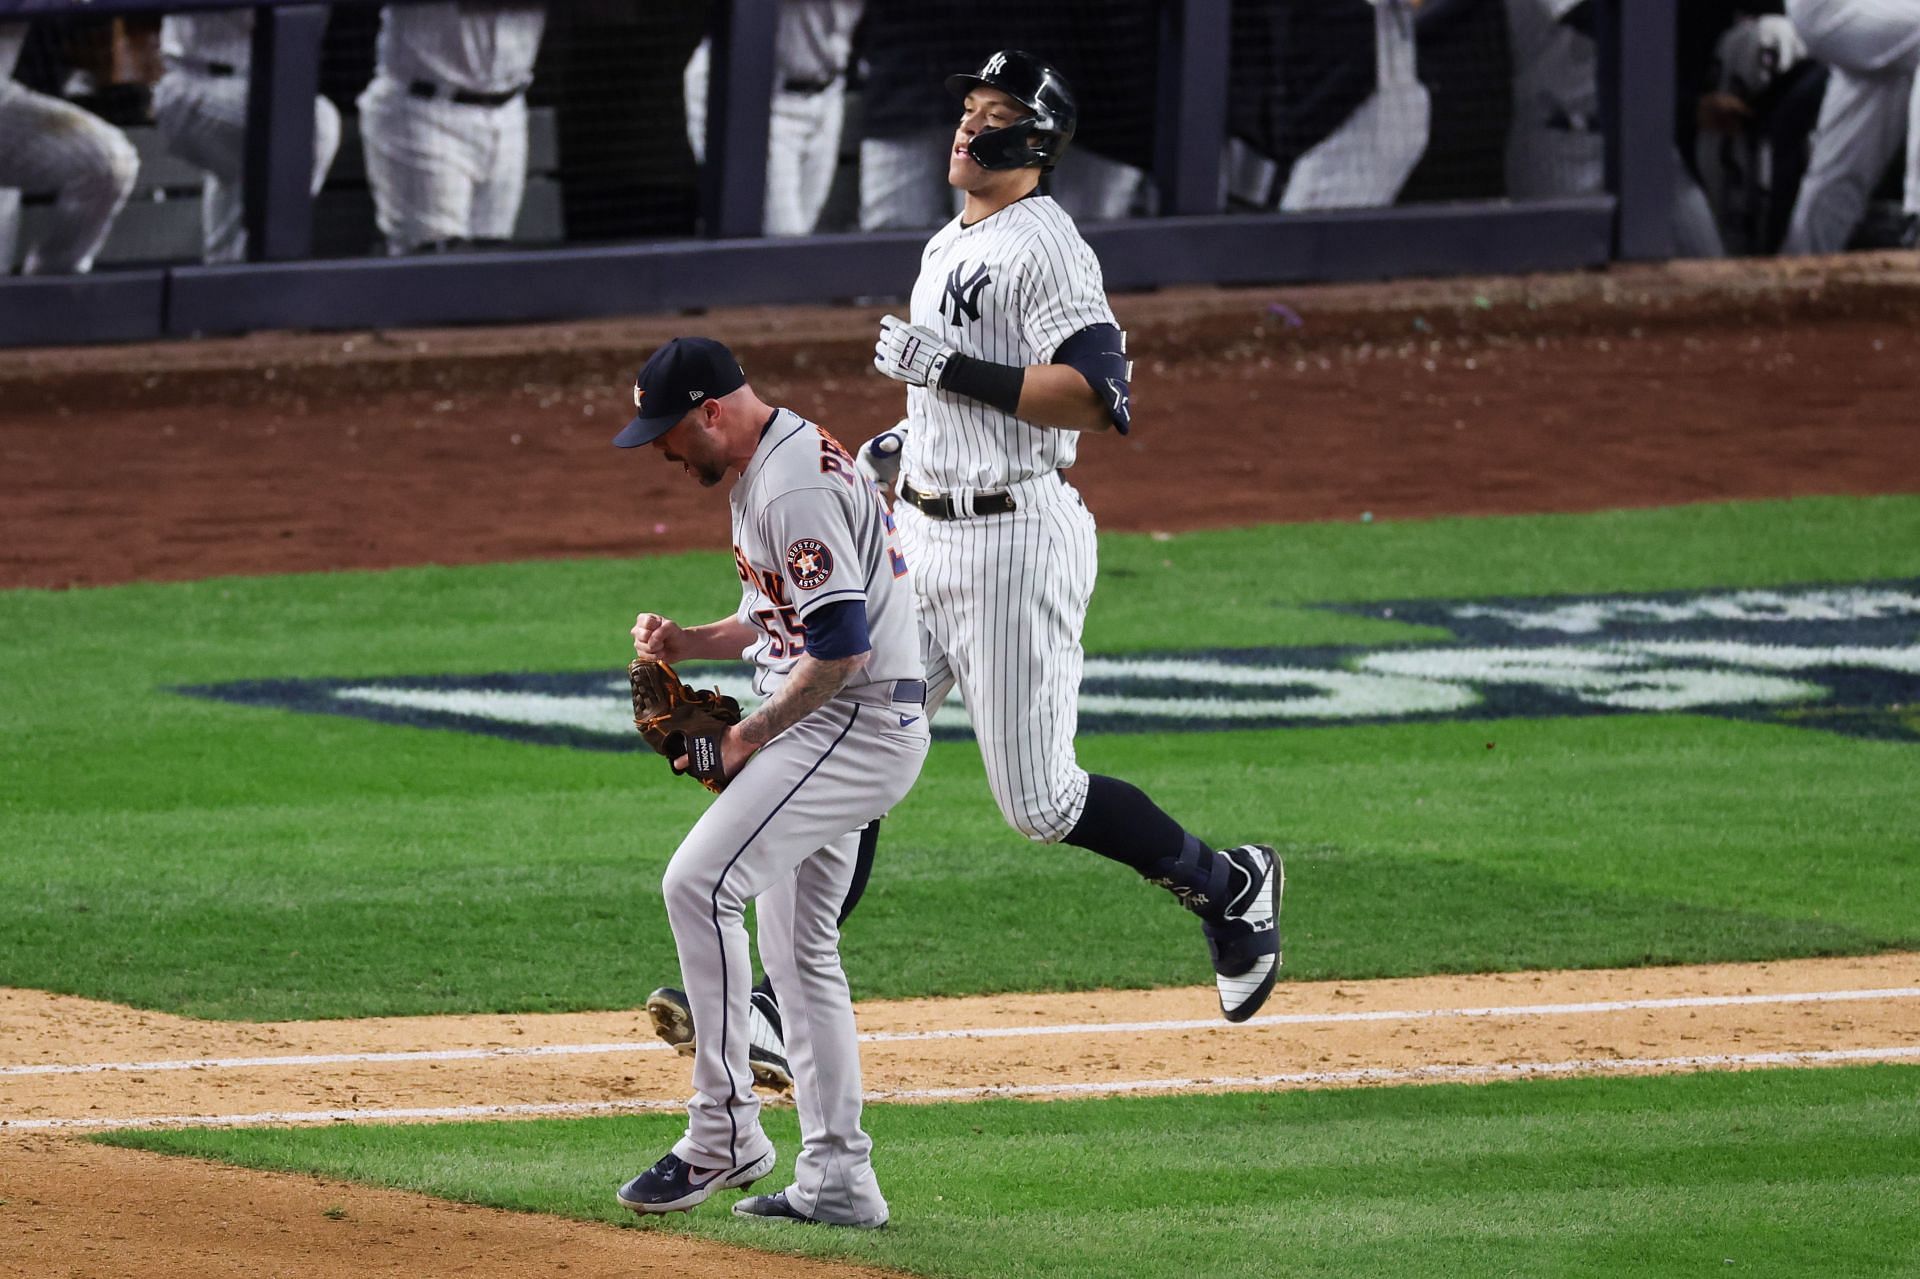 Aaron Judge runs to first base after grounding out in Game 4 of the ALCS.